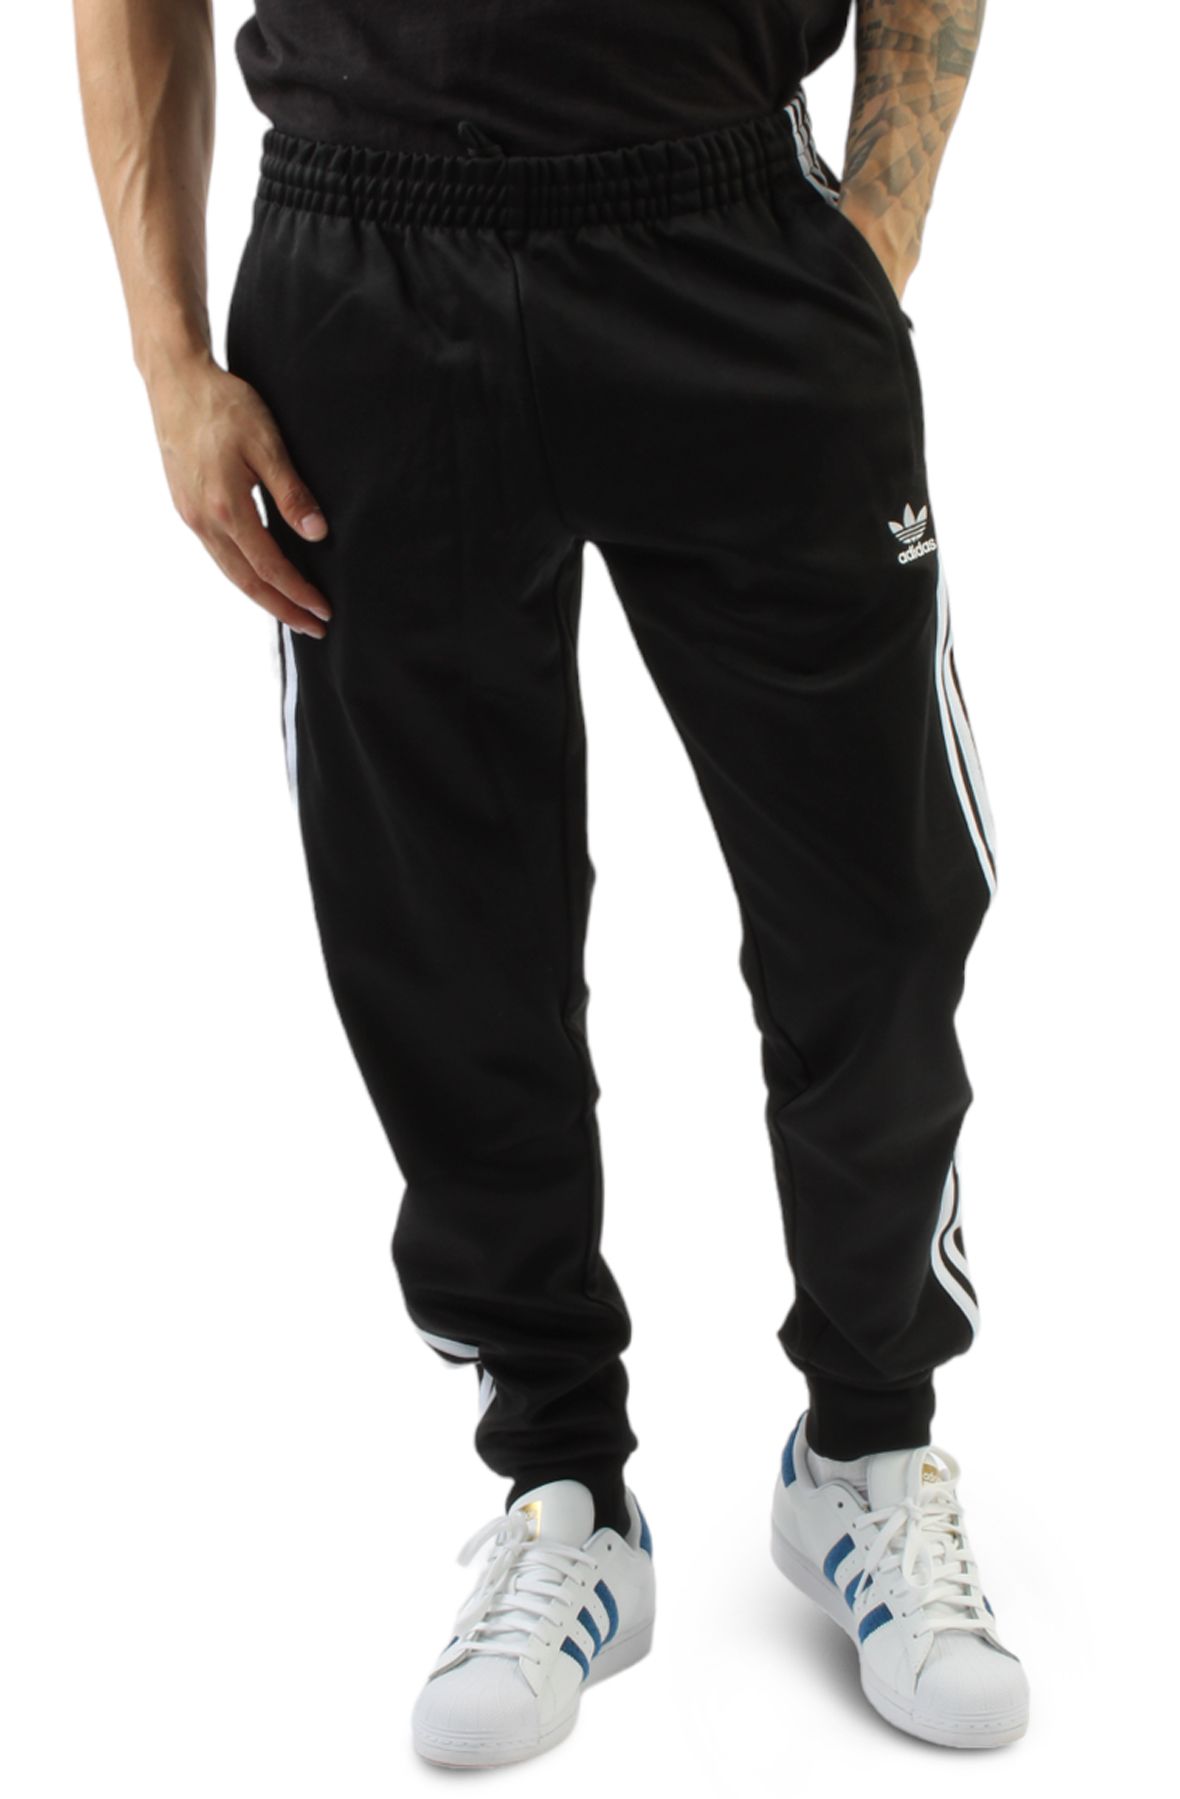 adidas Originals,unisex-youth,SST Track Pants,Black/White,Small